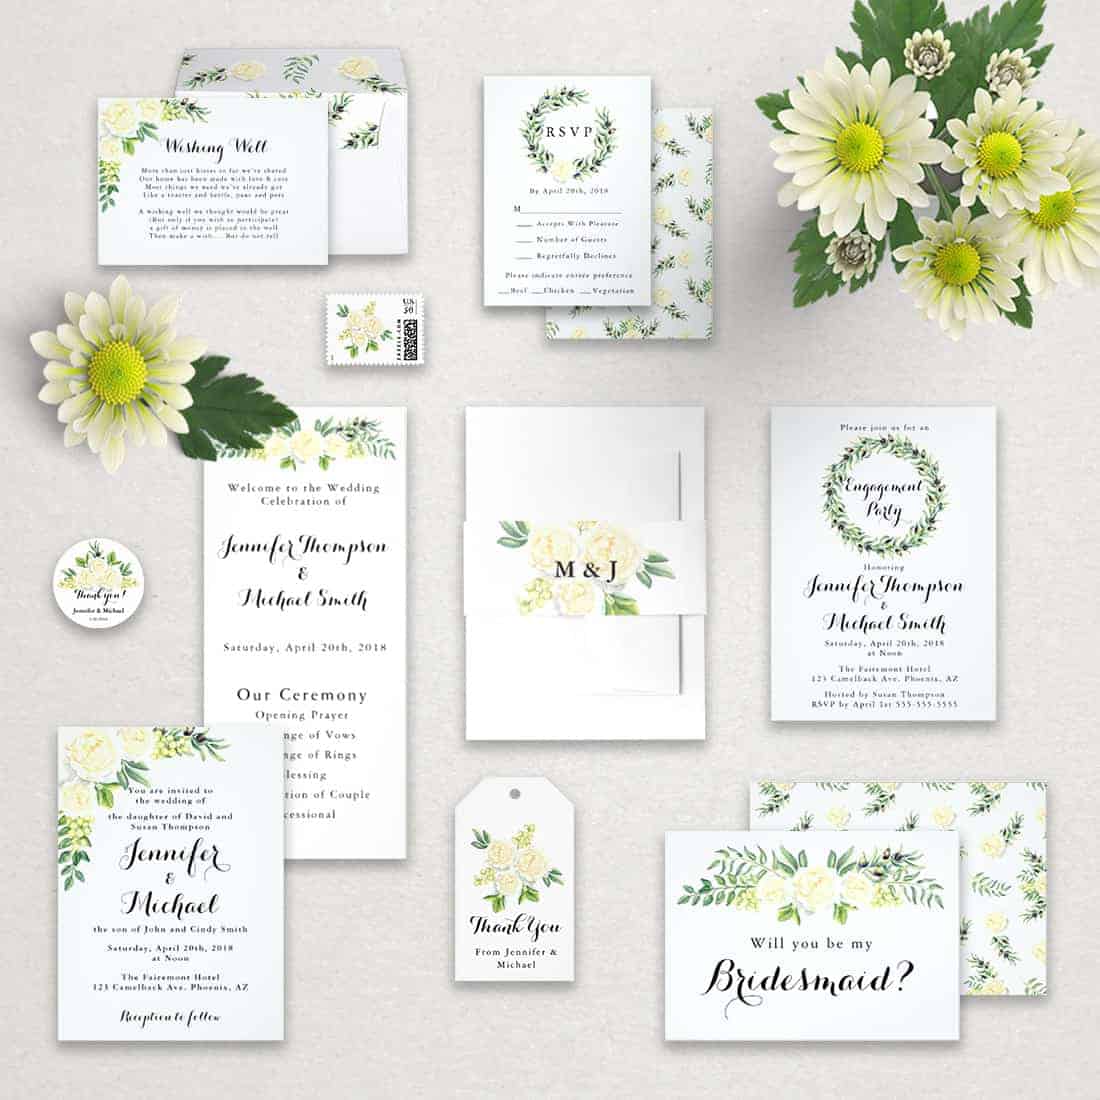 Zazzle Wedding Invitations for Summer- White Roses & Green Leaves Wedding